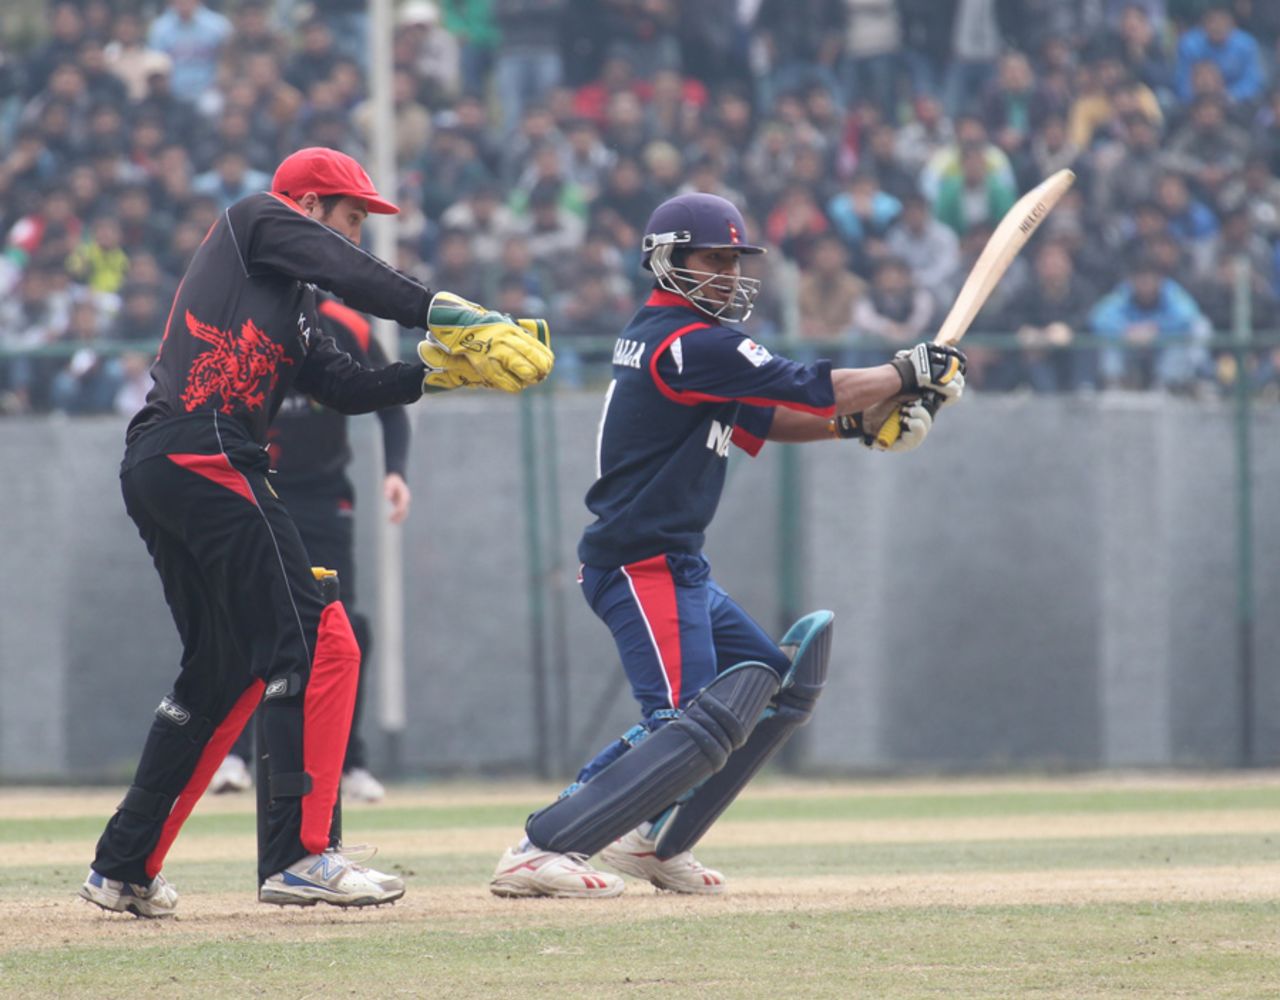 Nepal's Gyanendra Malla cuts the ball for four against Hong Kong during the ACC Twenty20 Cup 2011 match at Tribhuvan University Ground in Kathmandu on 3rd December 2011 